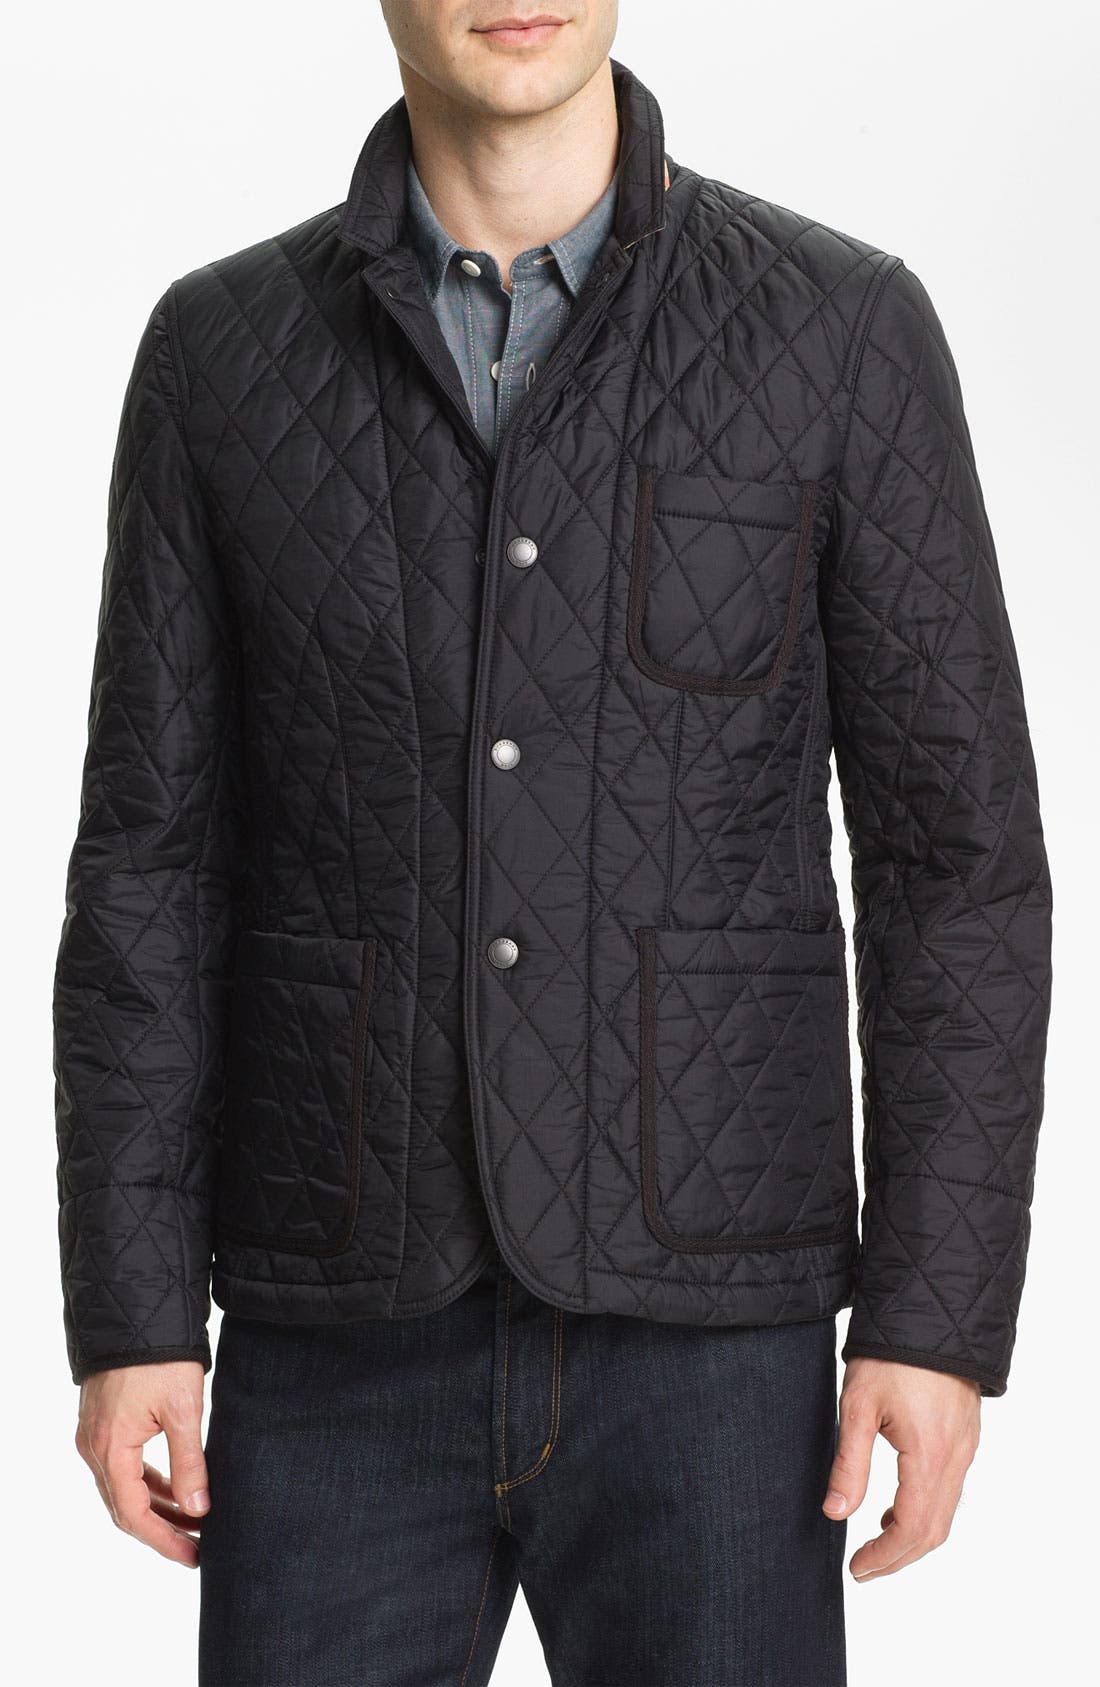 Burberry Brit 'Howe' Quilted Jacket 